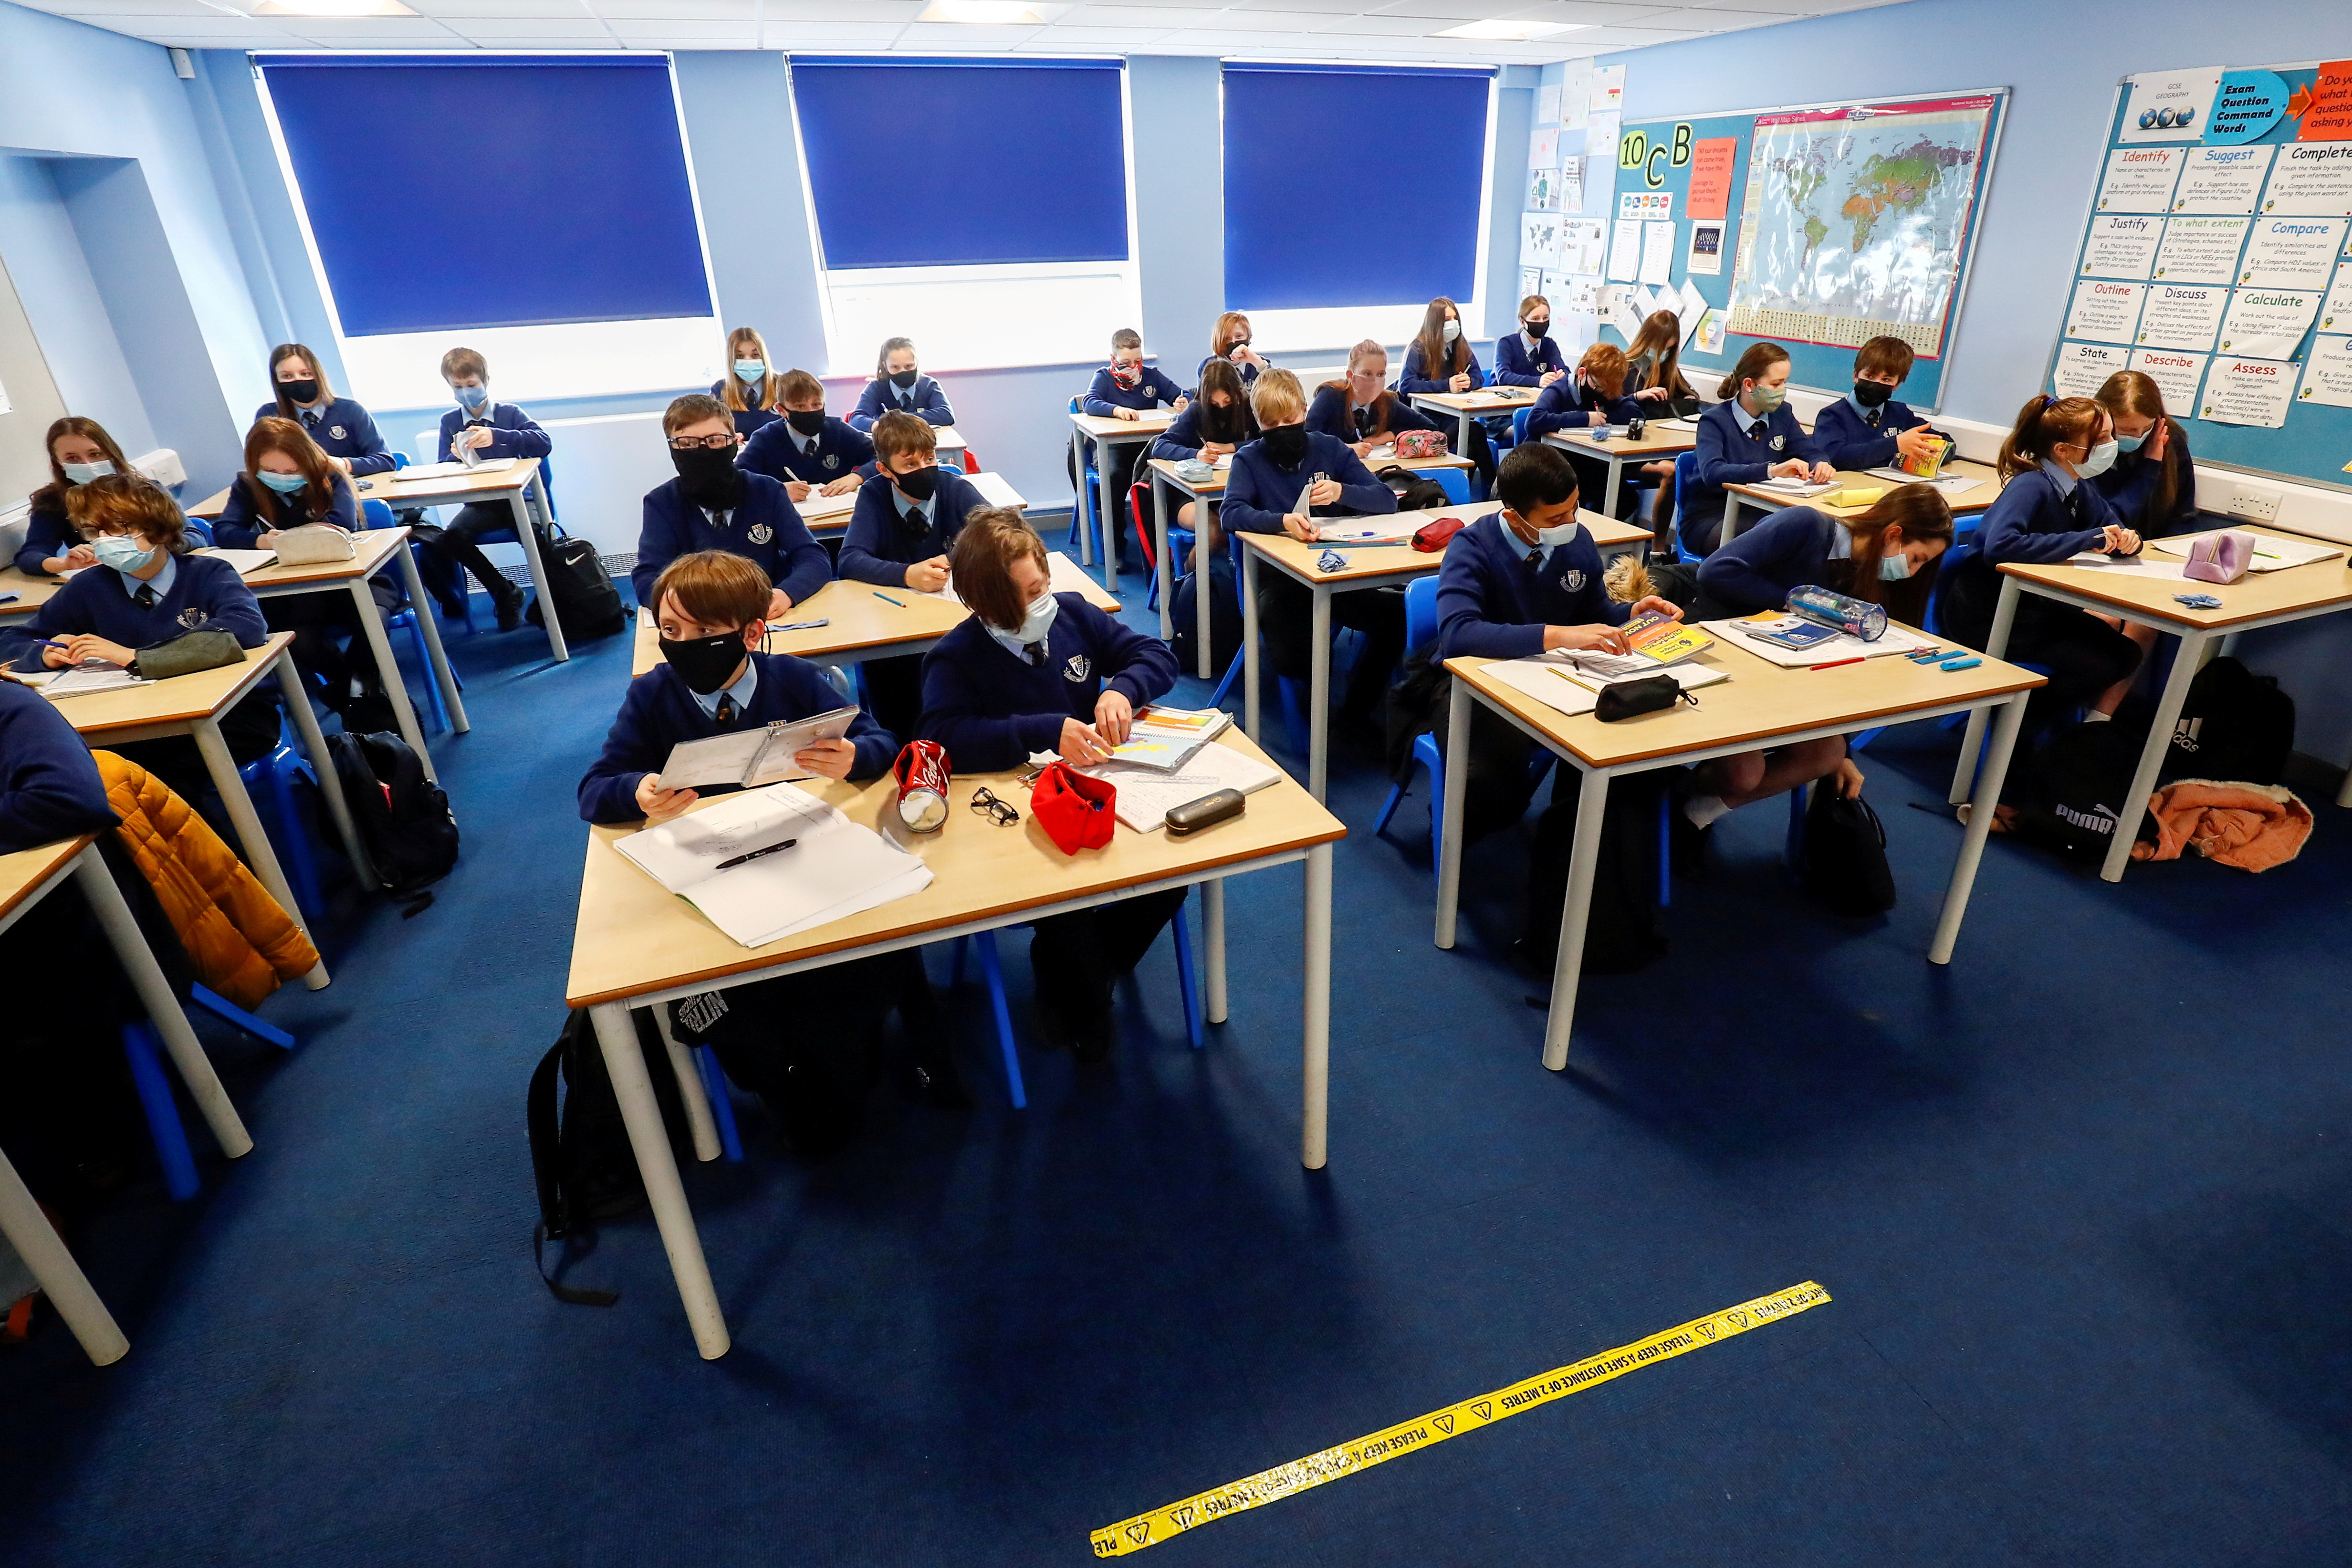 Students attend a lesson at Weaverham High School, as the coronavirus disease (COVID-19) lockdown begins to ease, in Cheshire, Britain, March 9, 2021. REUTERS/Jason Cairnduff